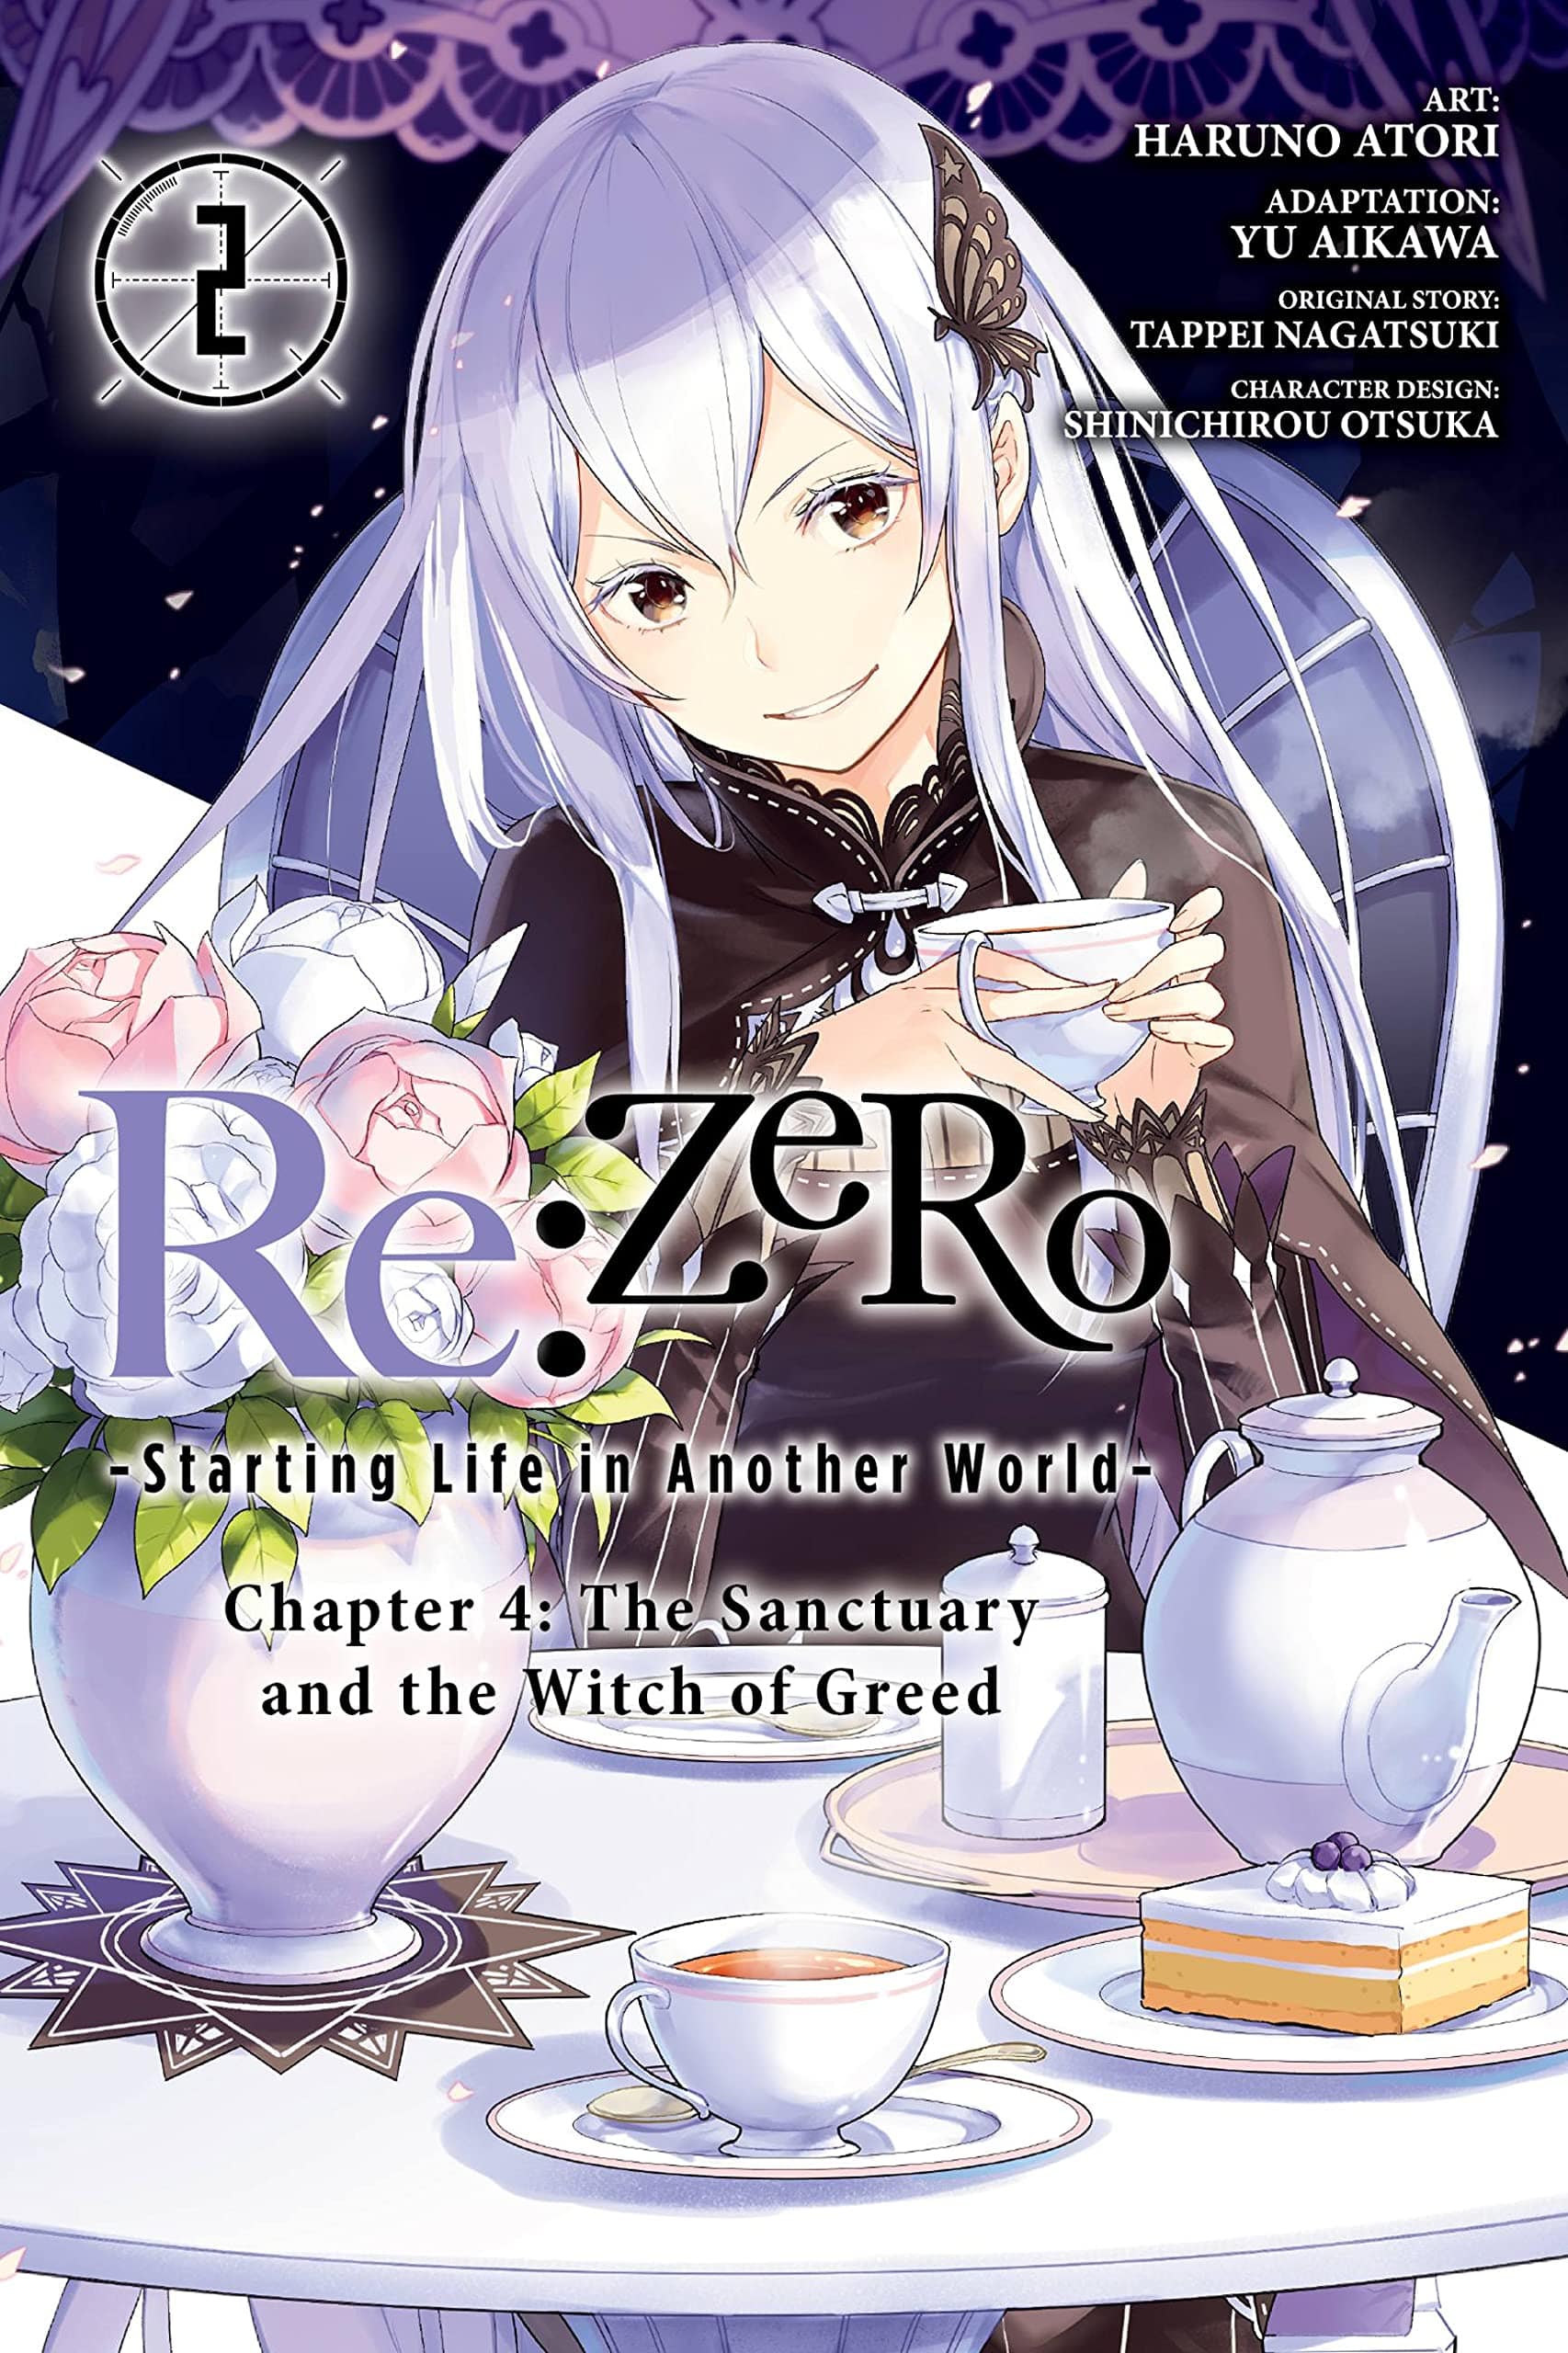 Re:Zero: Starting Life in Another World Chapter 4 - Sanctuary and the Witch of Greed Vol. 2 - Third Eye